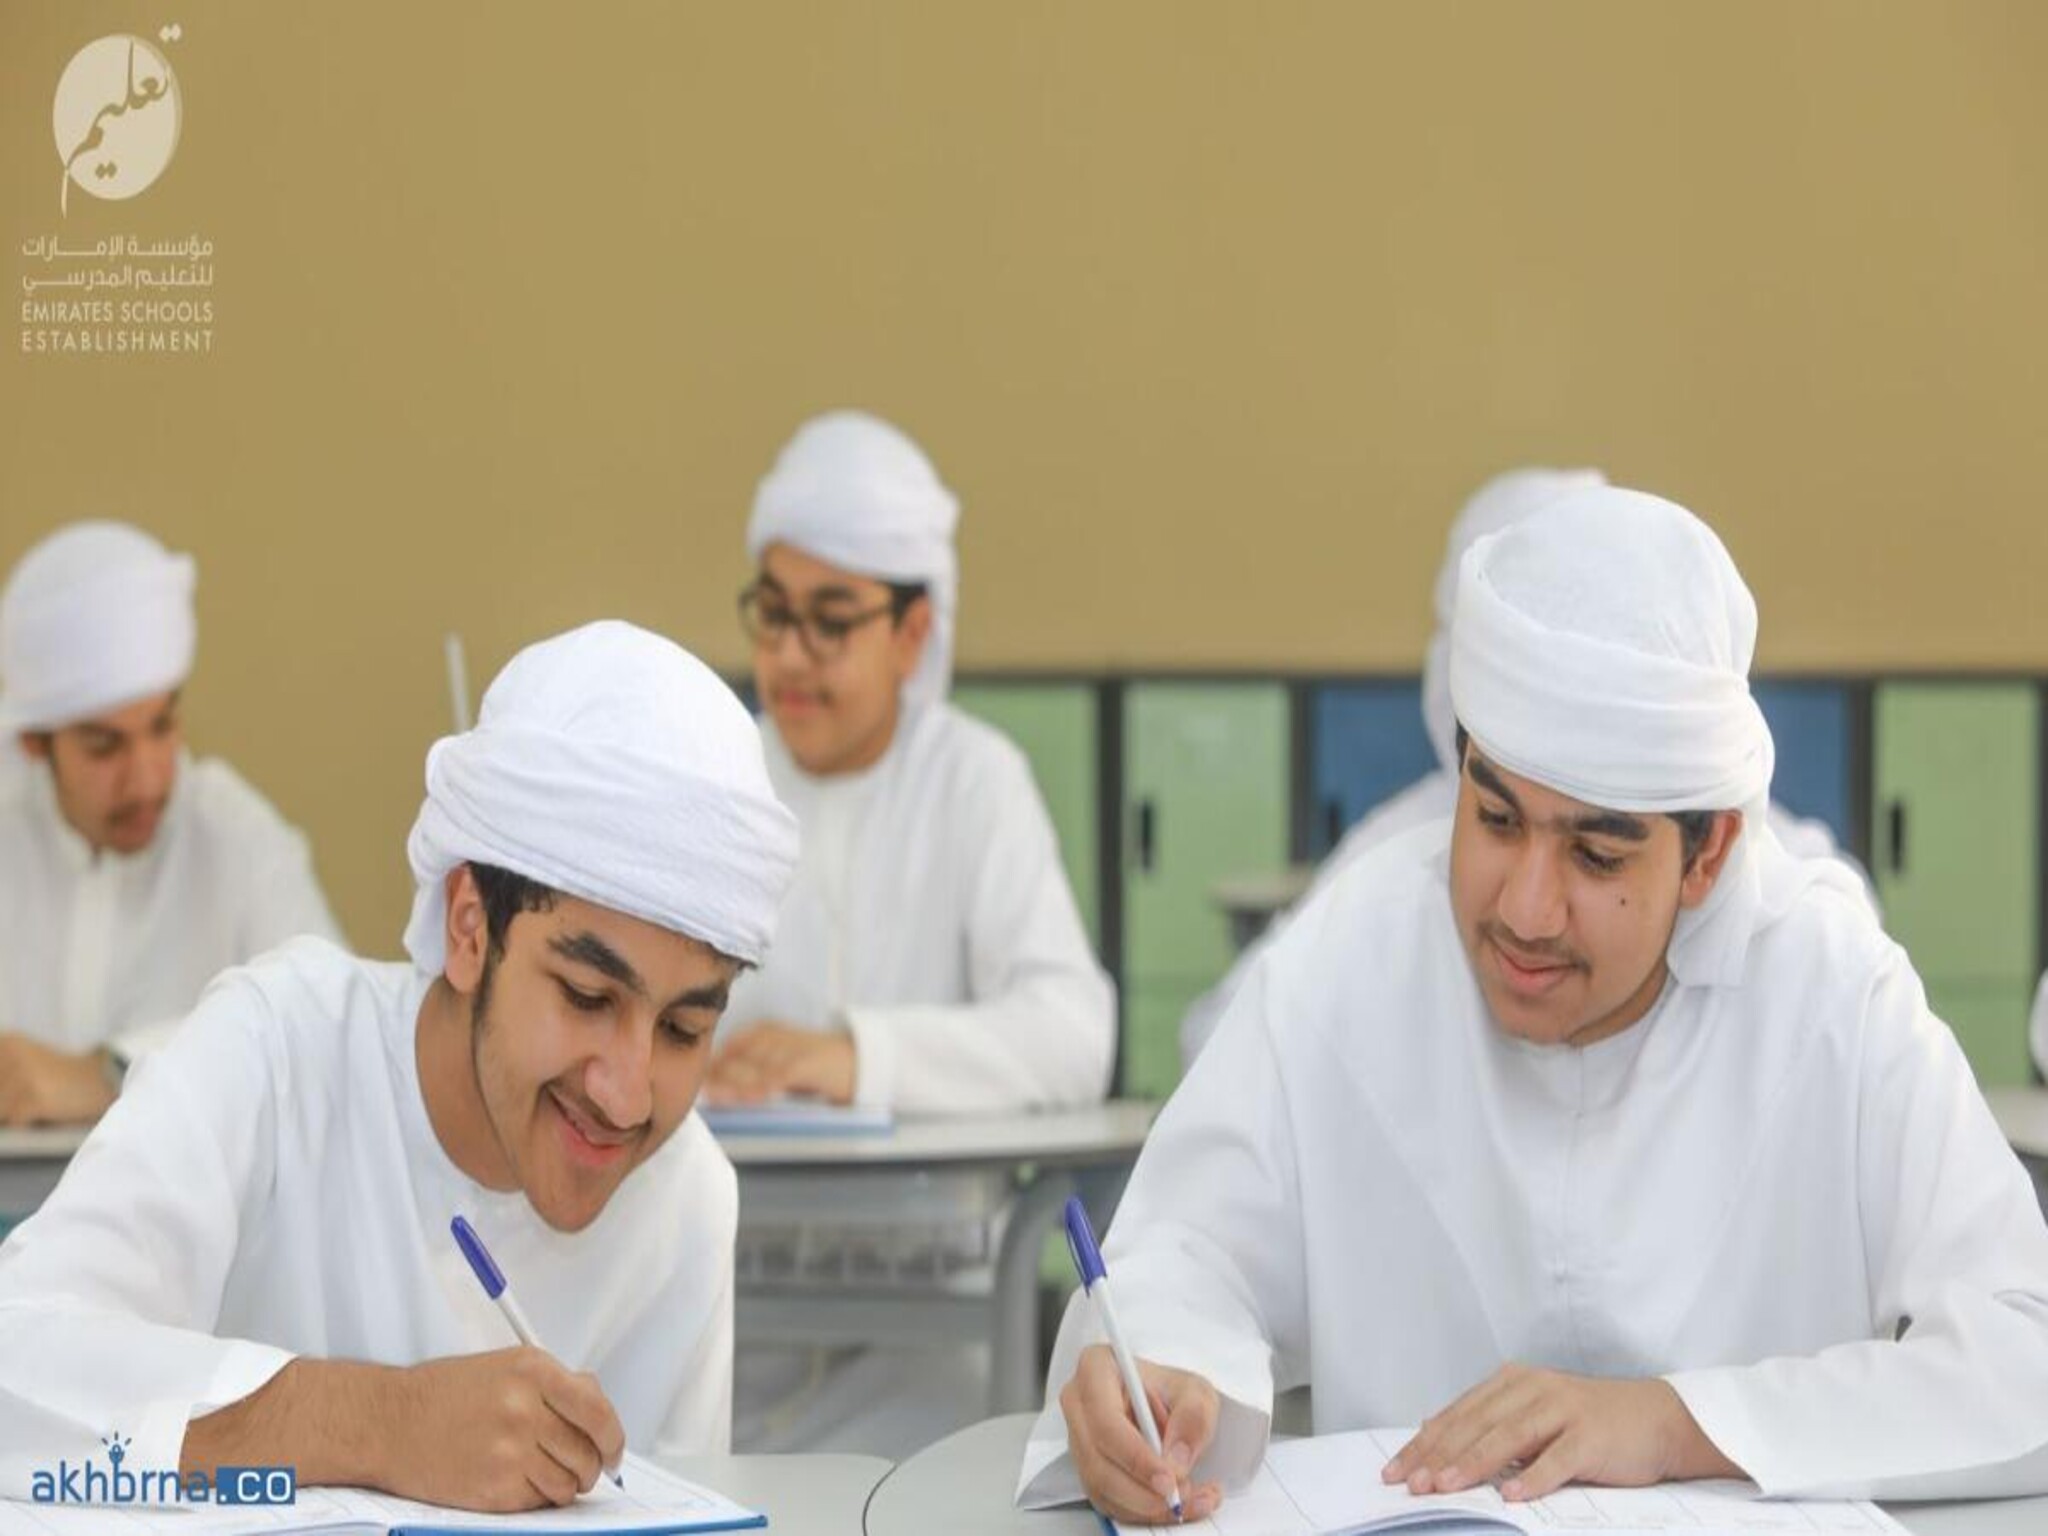 Emirates School announces opening of registration for the “second period”